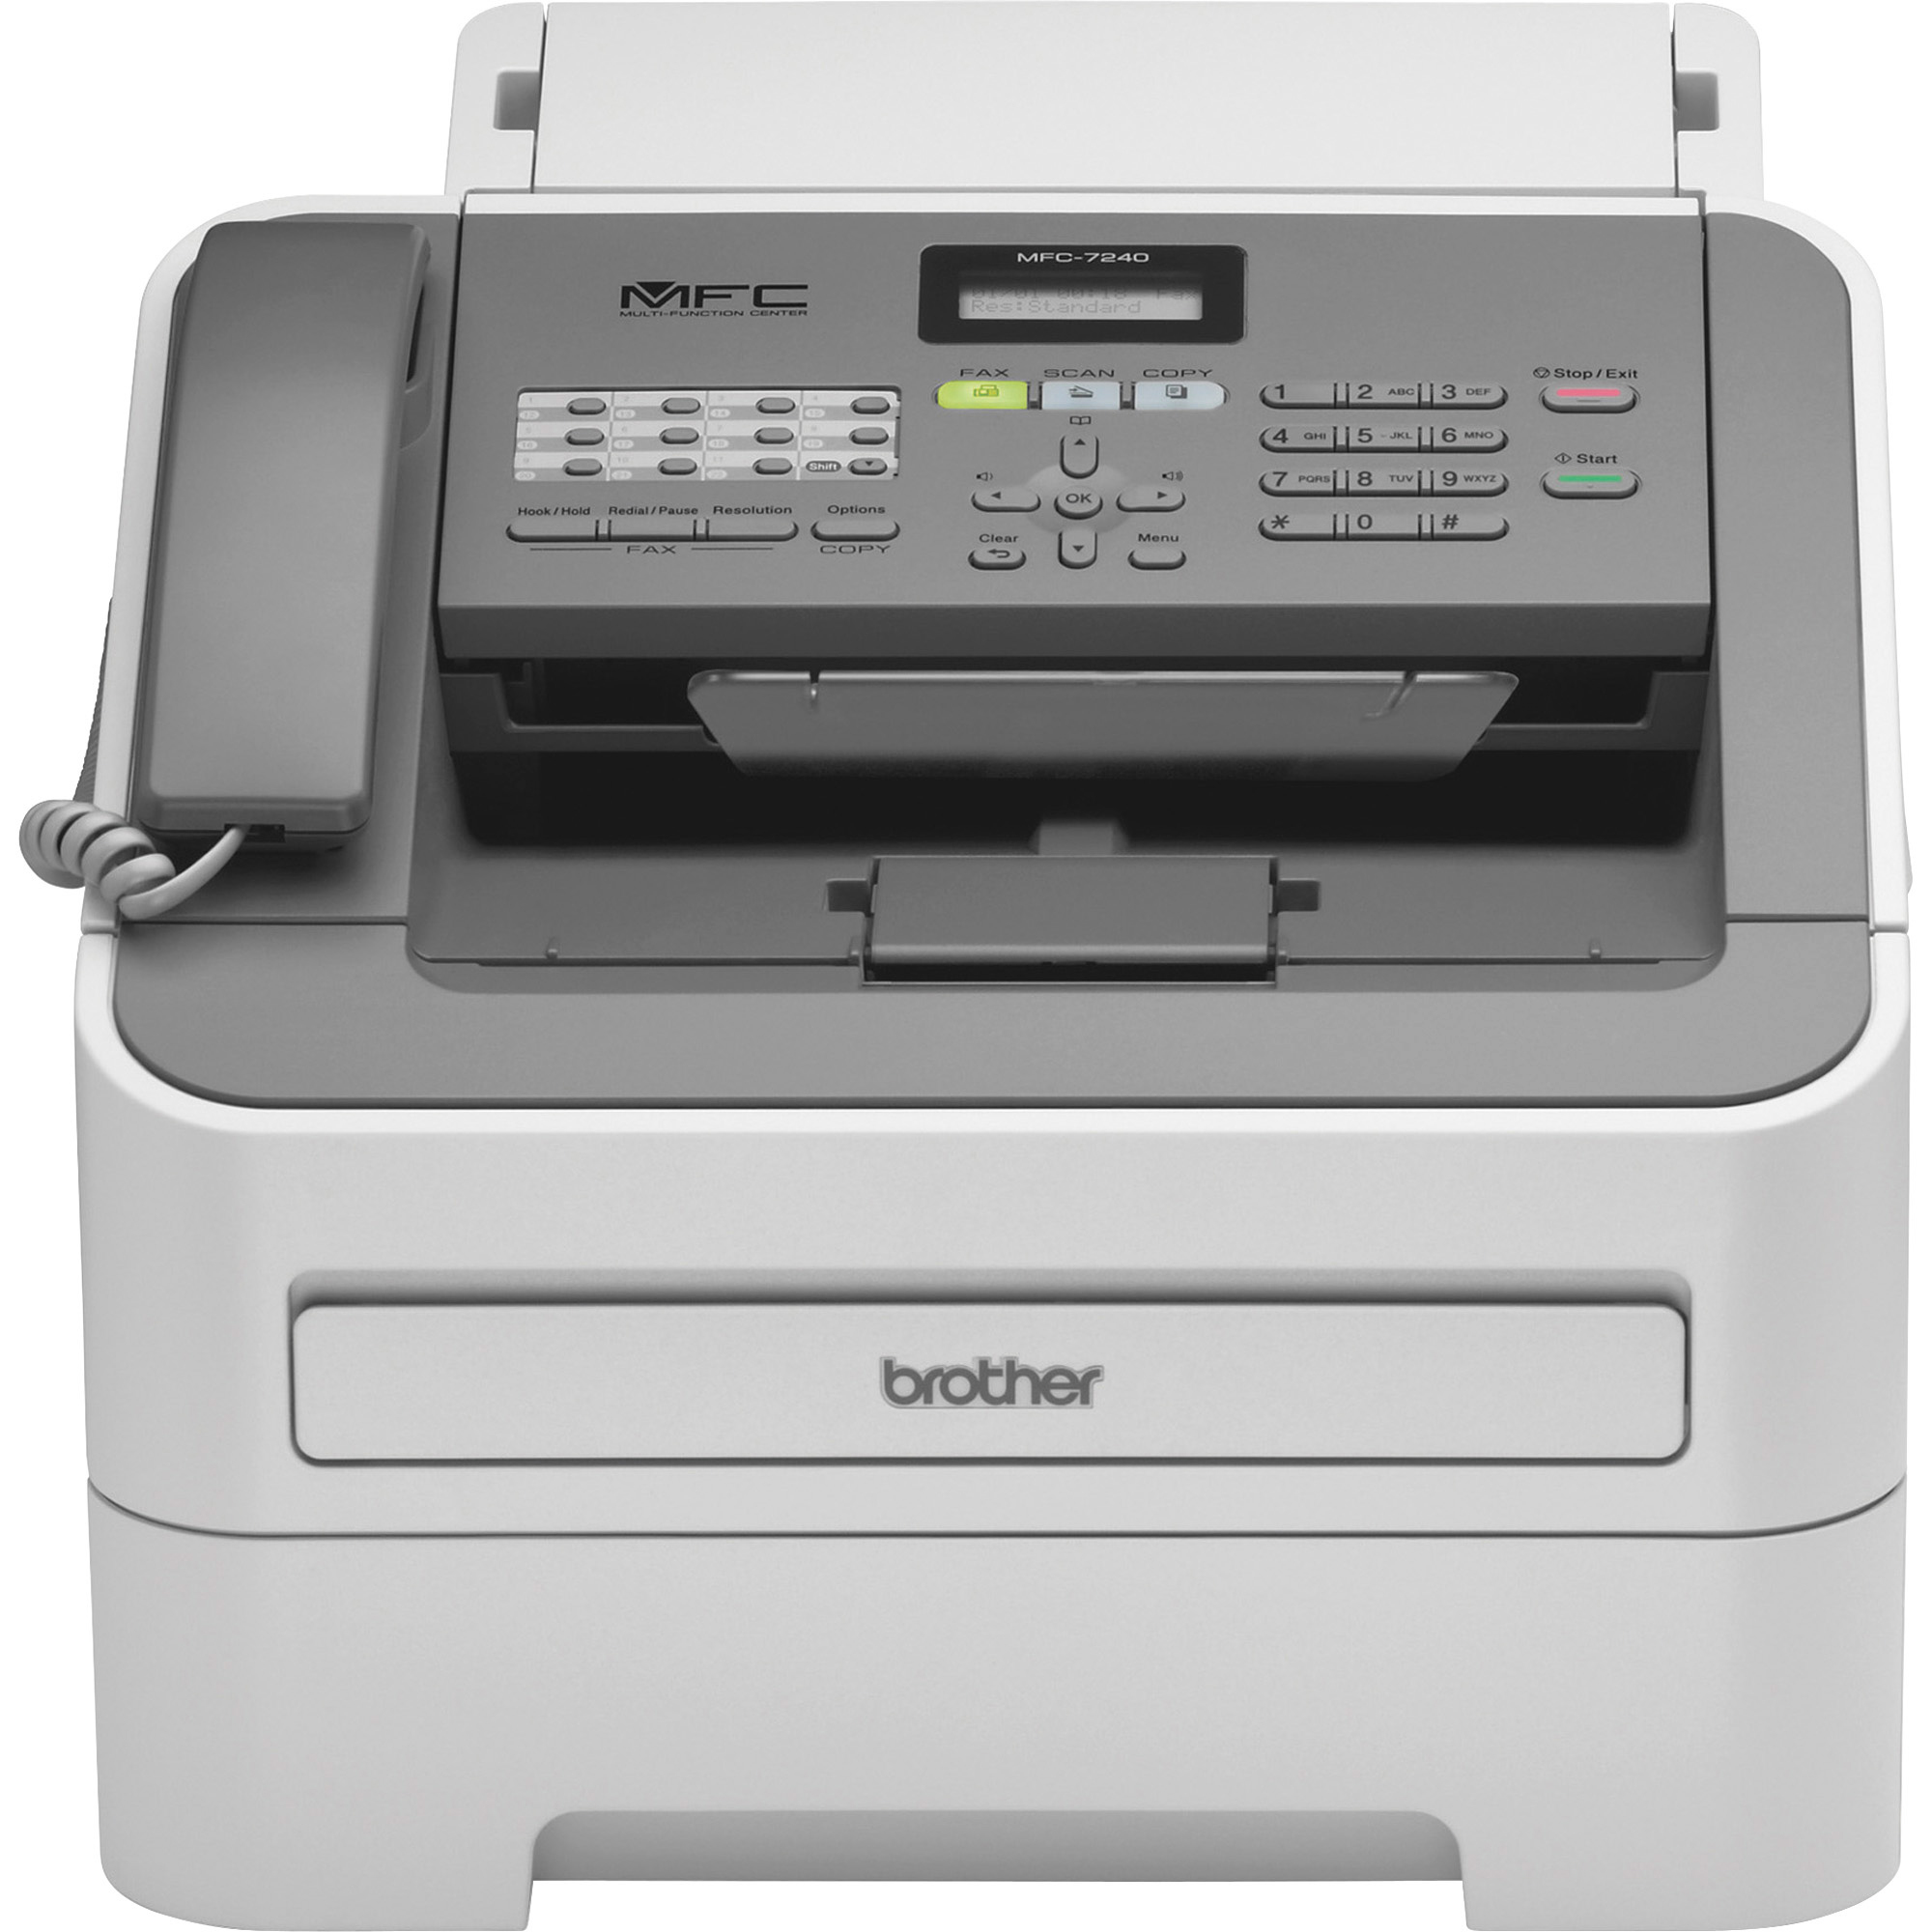 Almost all type of Printers available